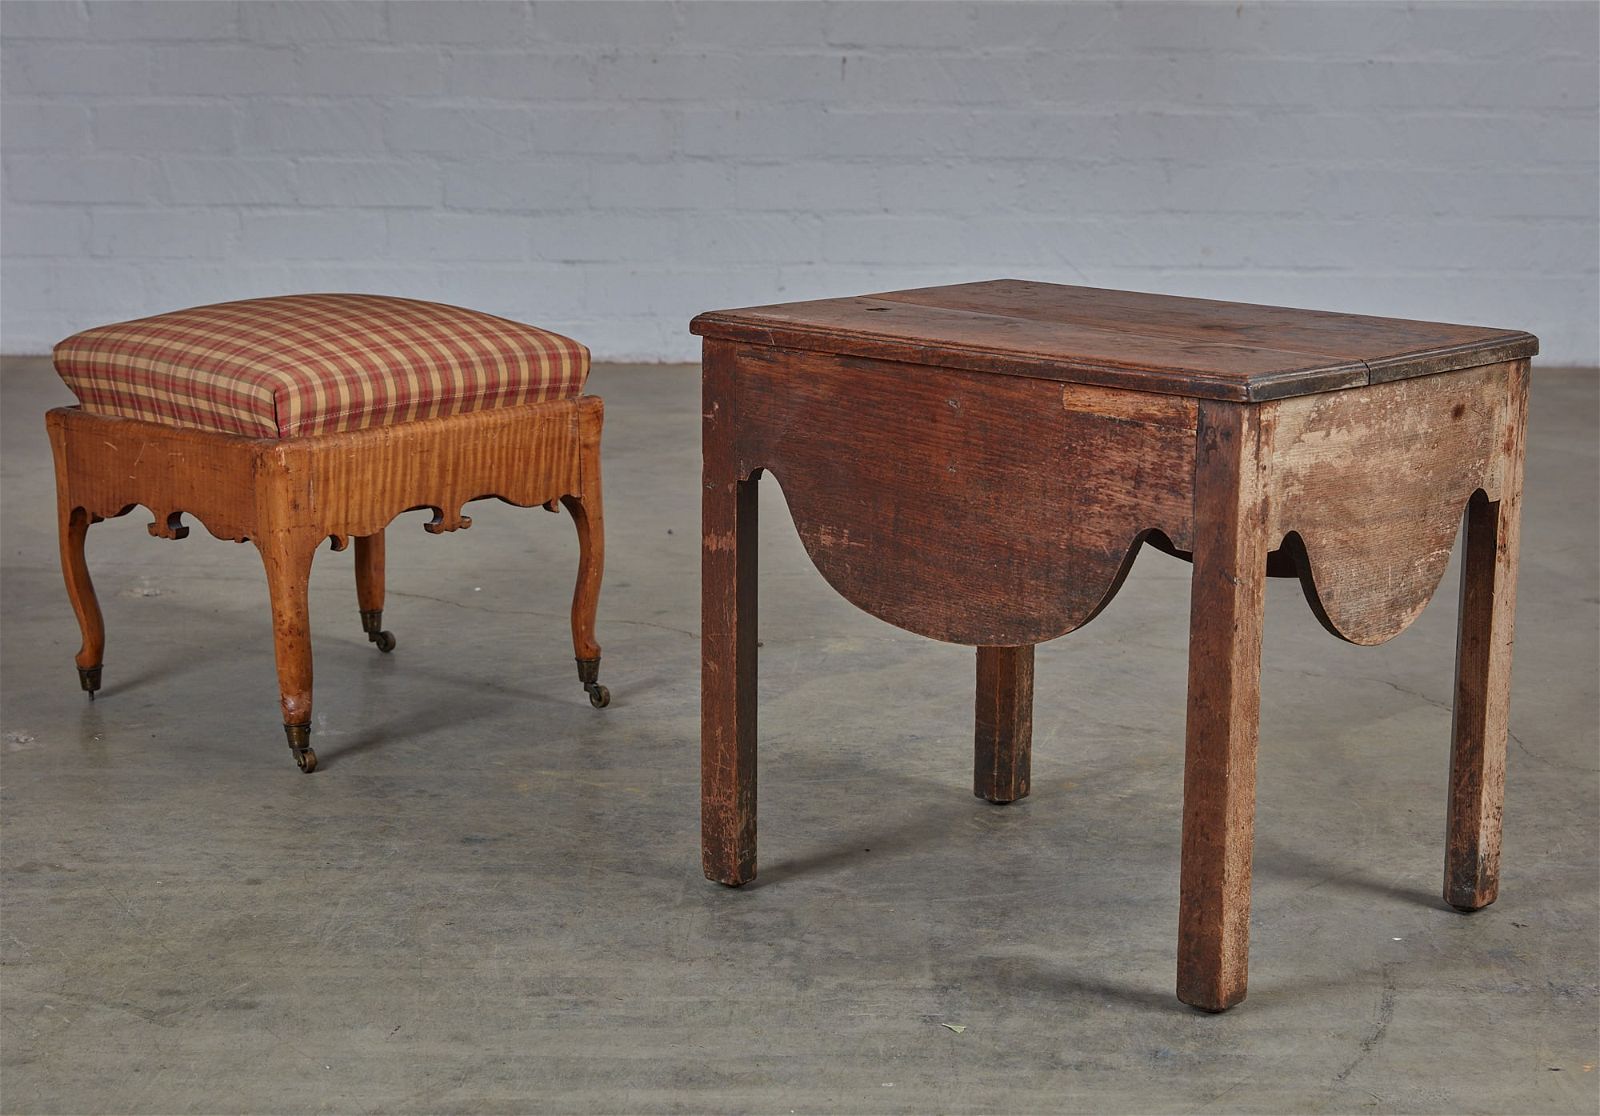 AN ENGLISH OAK TABLE AND AN AMERICAN